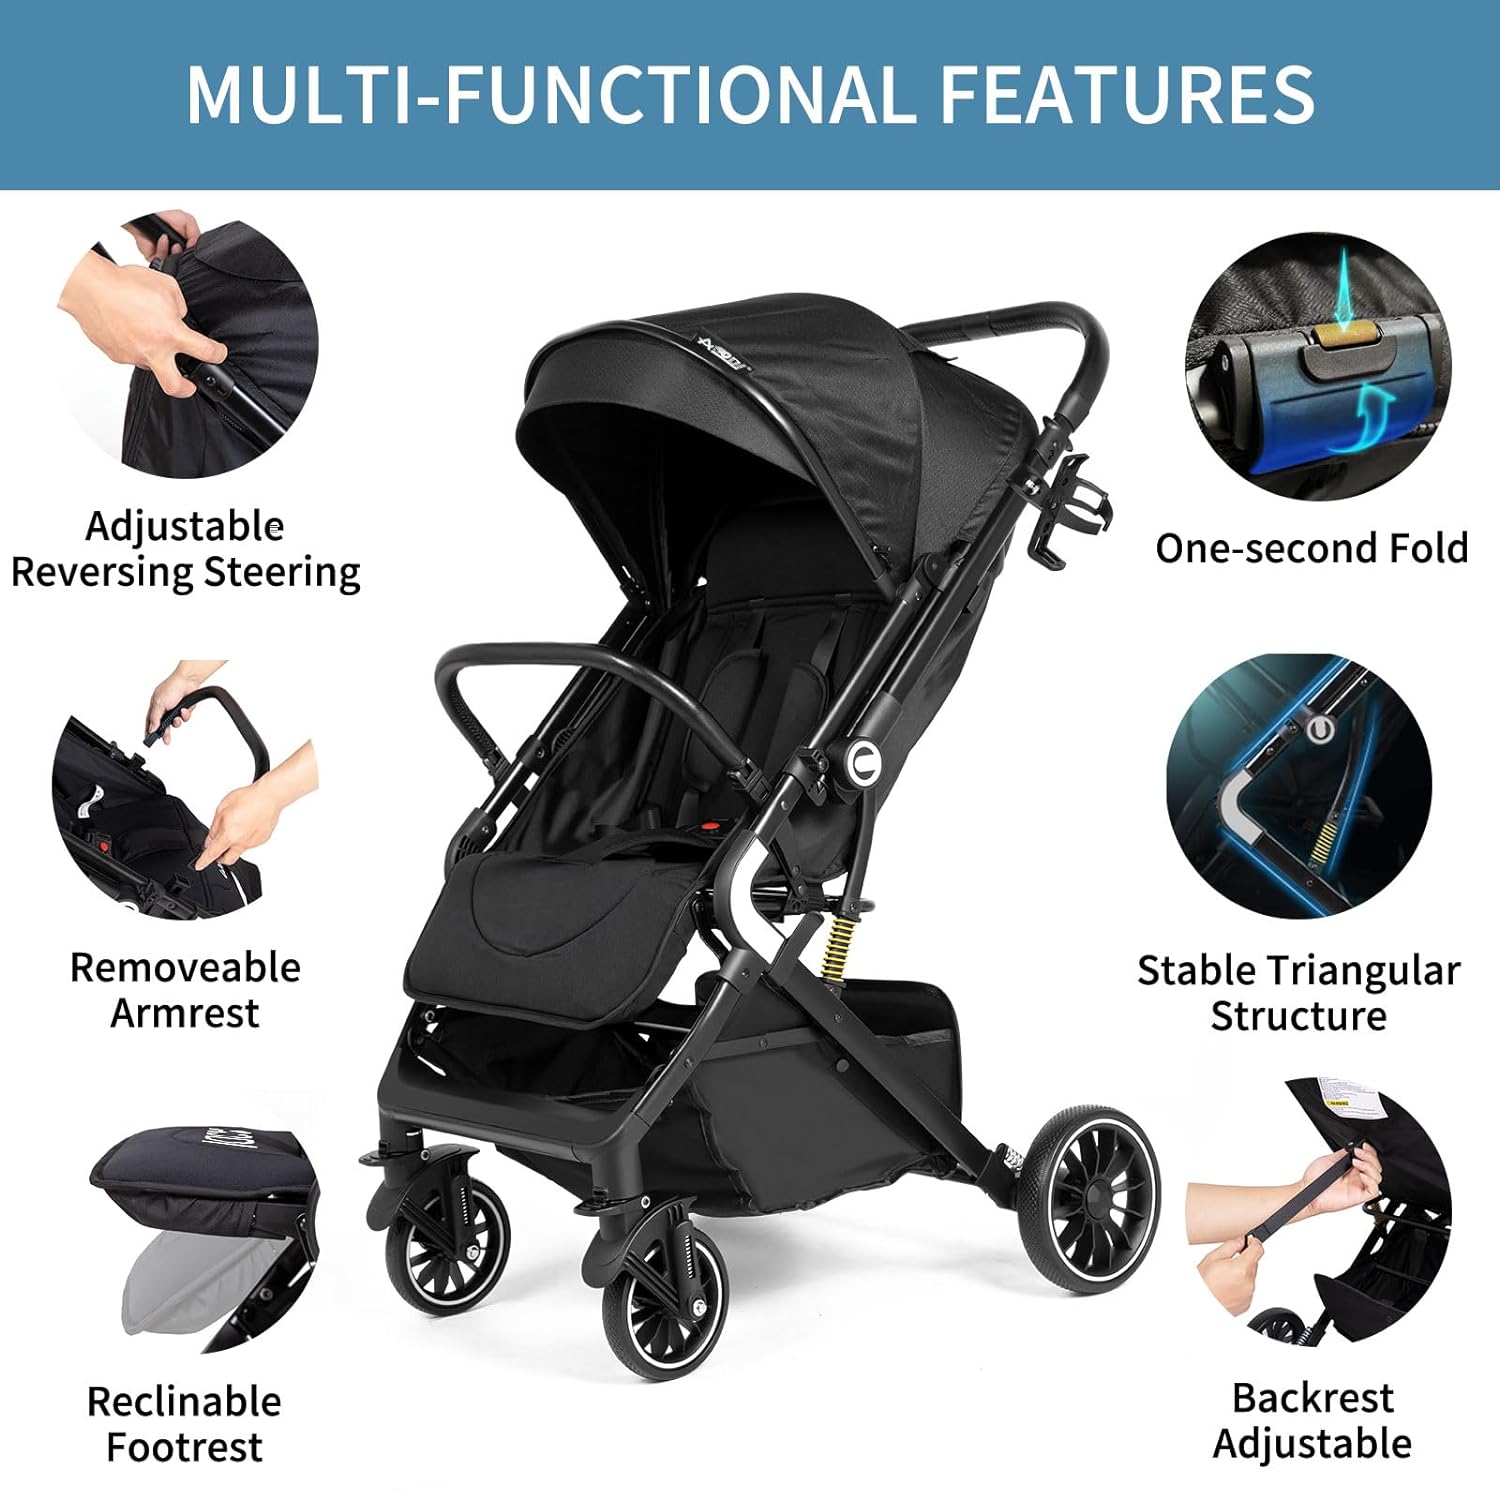 AODI Lightweight Reversible Baby Stroller, Infant Toddler Stroller, One Hand Easy Folding Compact Travel Stroller with Cup Holder  Oversize Basket, Sleep Shade for Airplane Travel and More